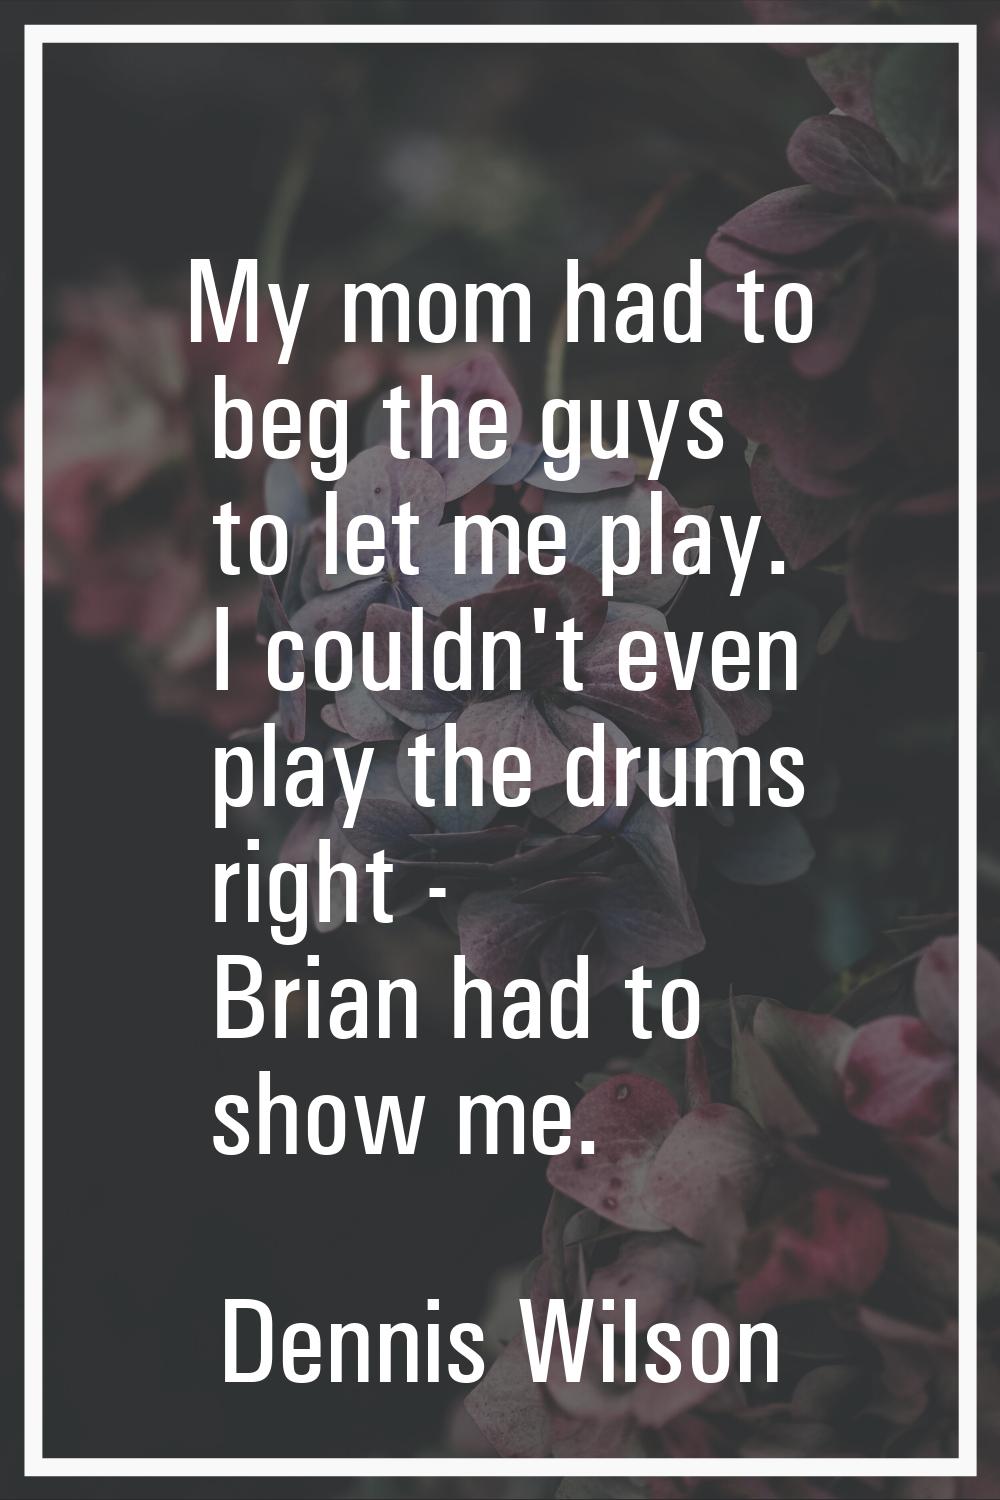 My mom had to beg the guys to let me play. I couldn't even play the drums right - Brian had to show